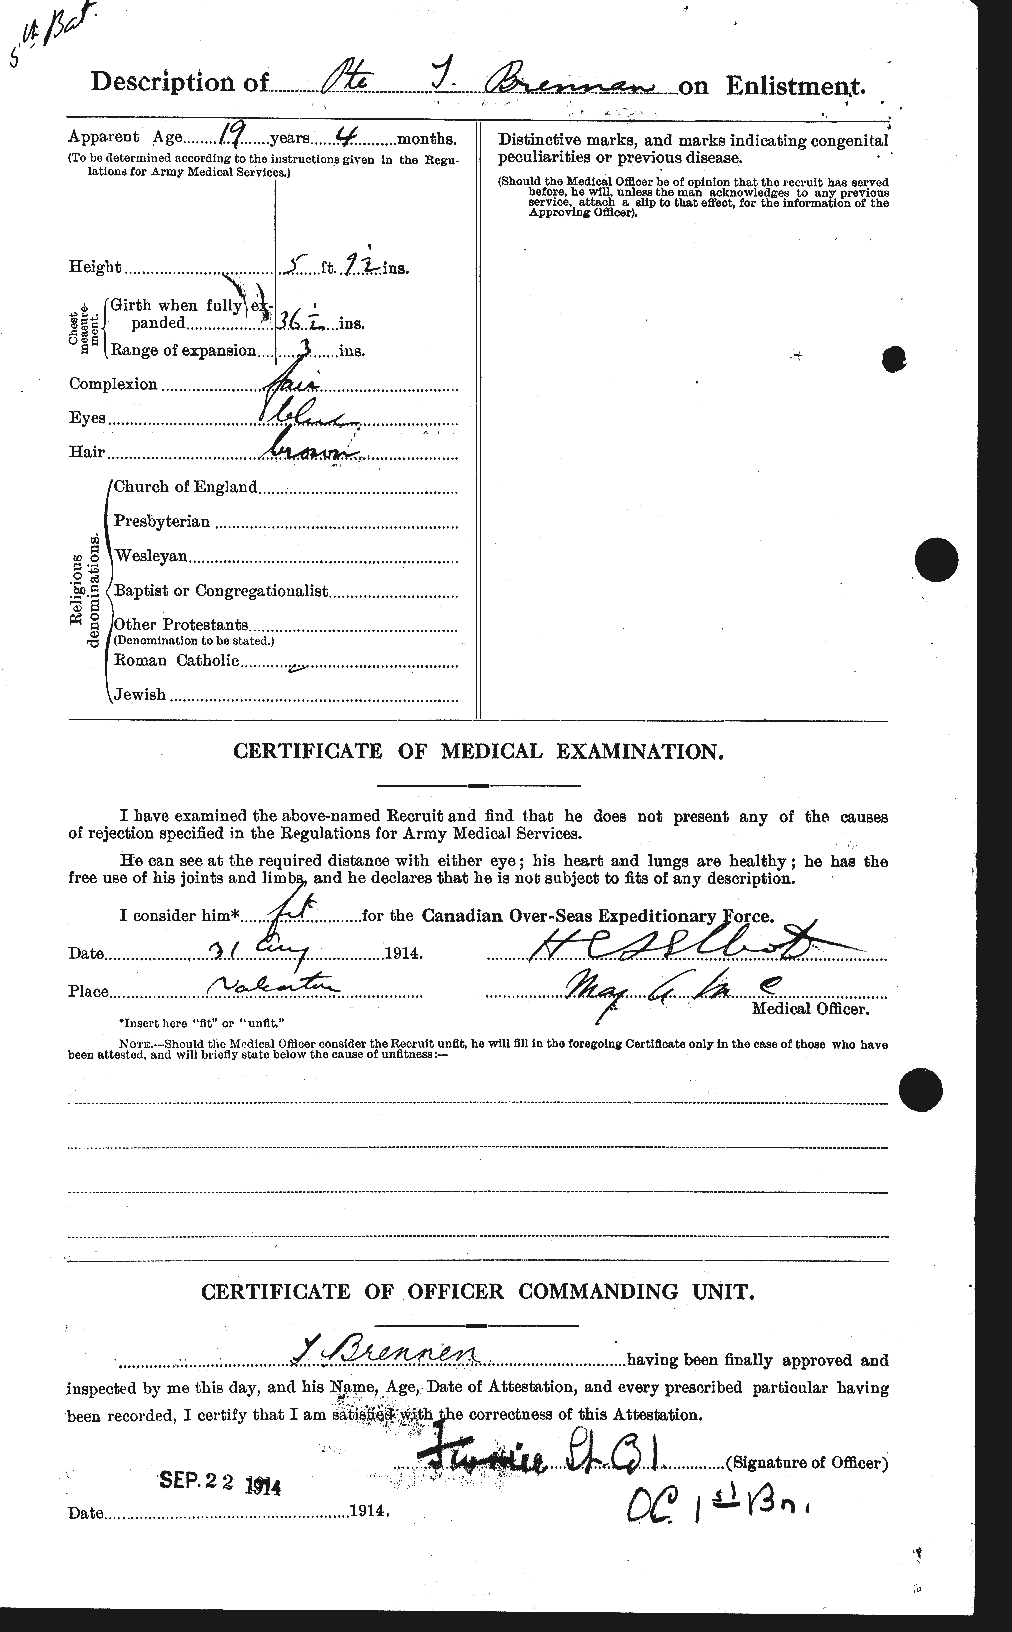 Personnel Records of the First World War - CEF 260172b